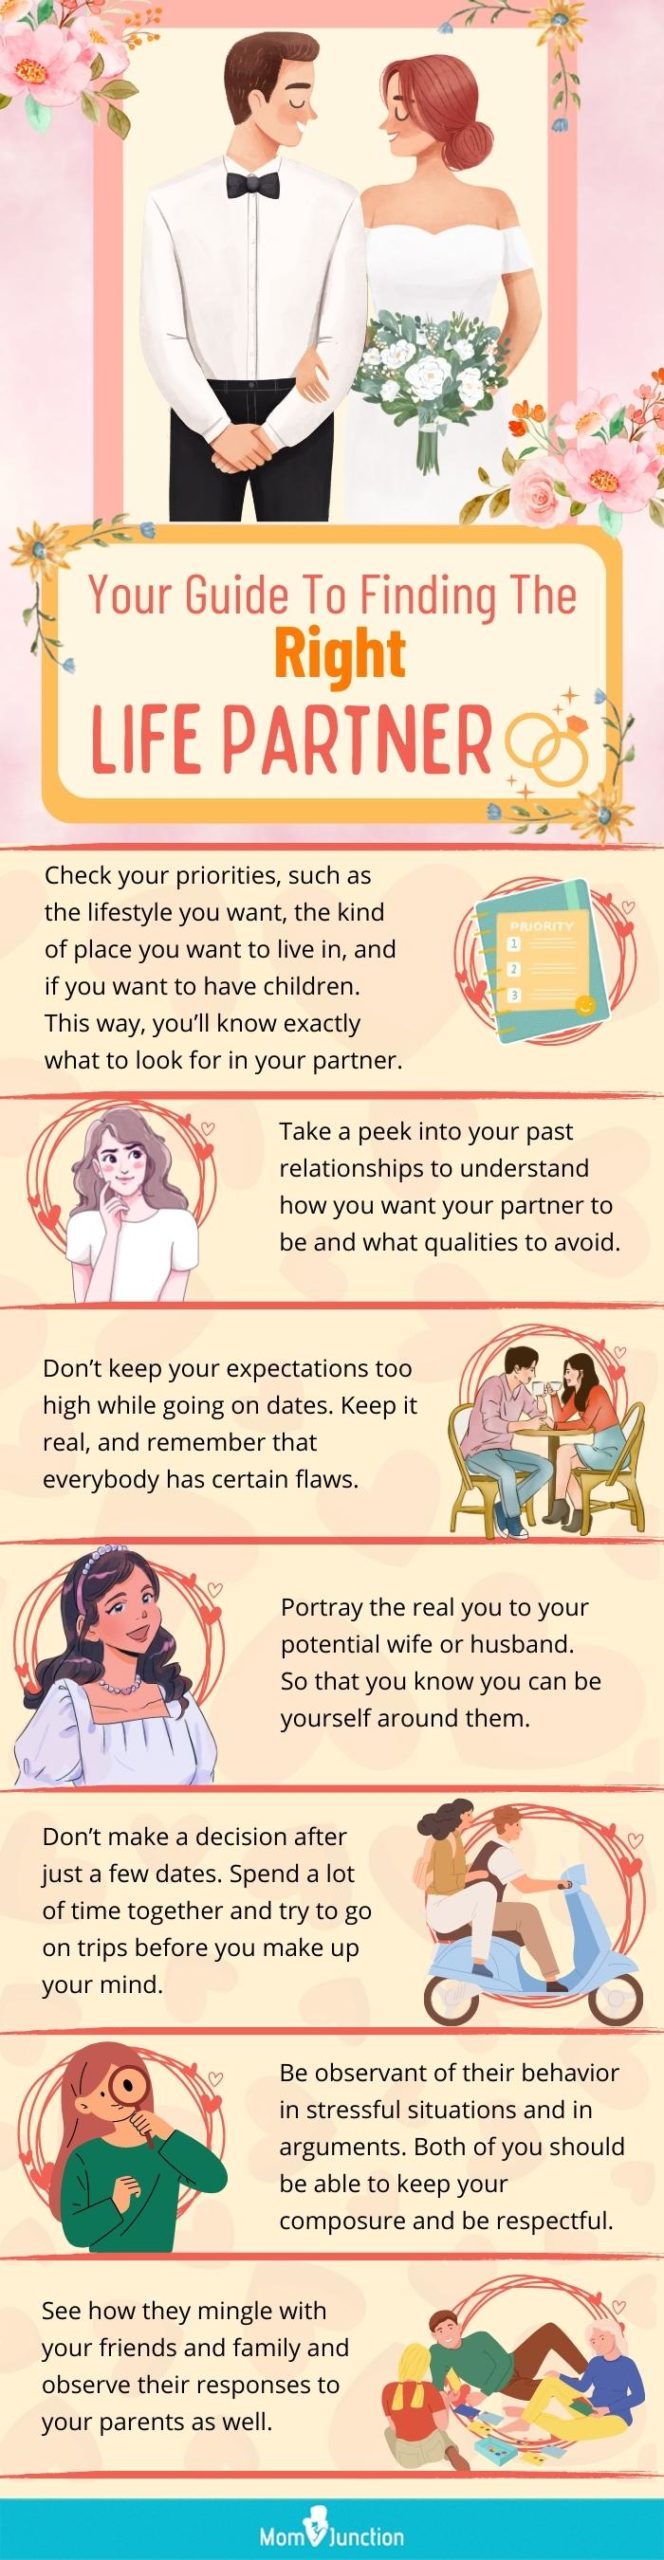 your guide to finding the right life partner [infographic]